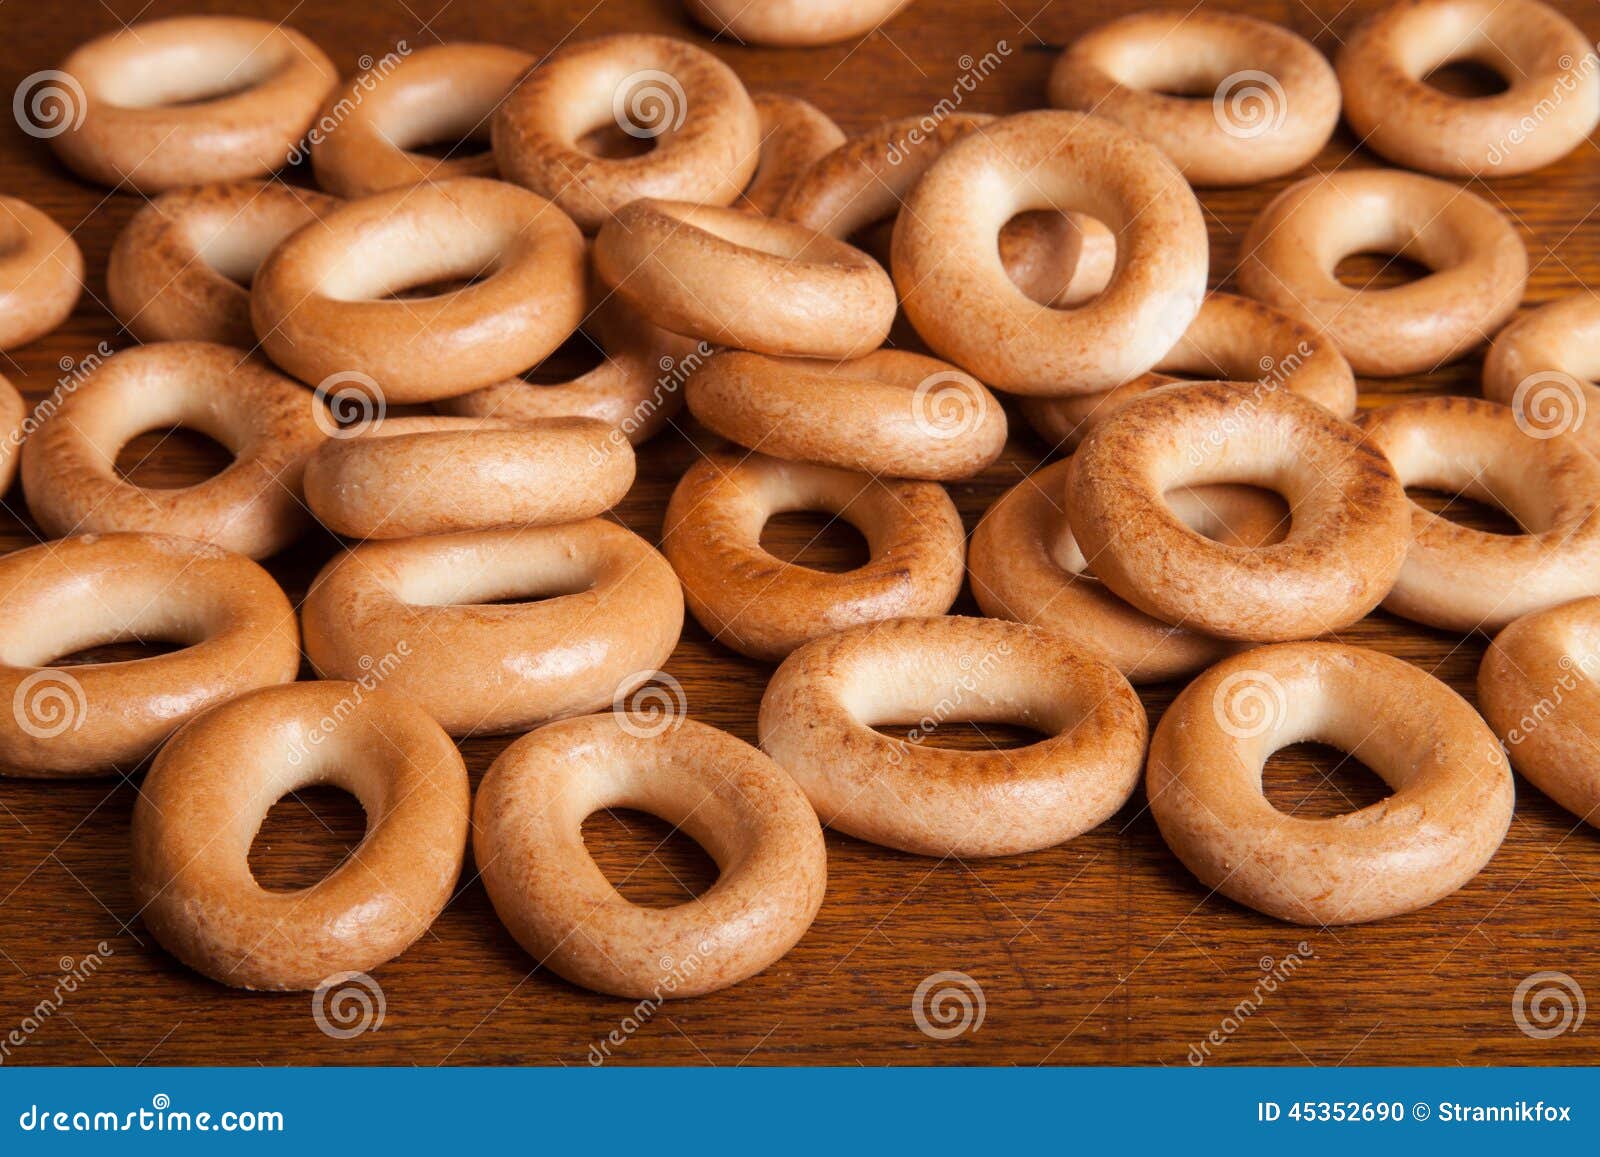 placer bagels on wooden with shallow depth of field